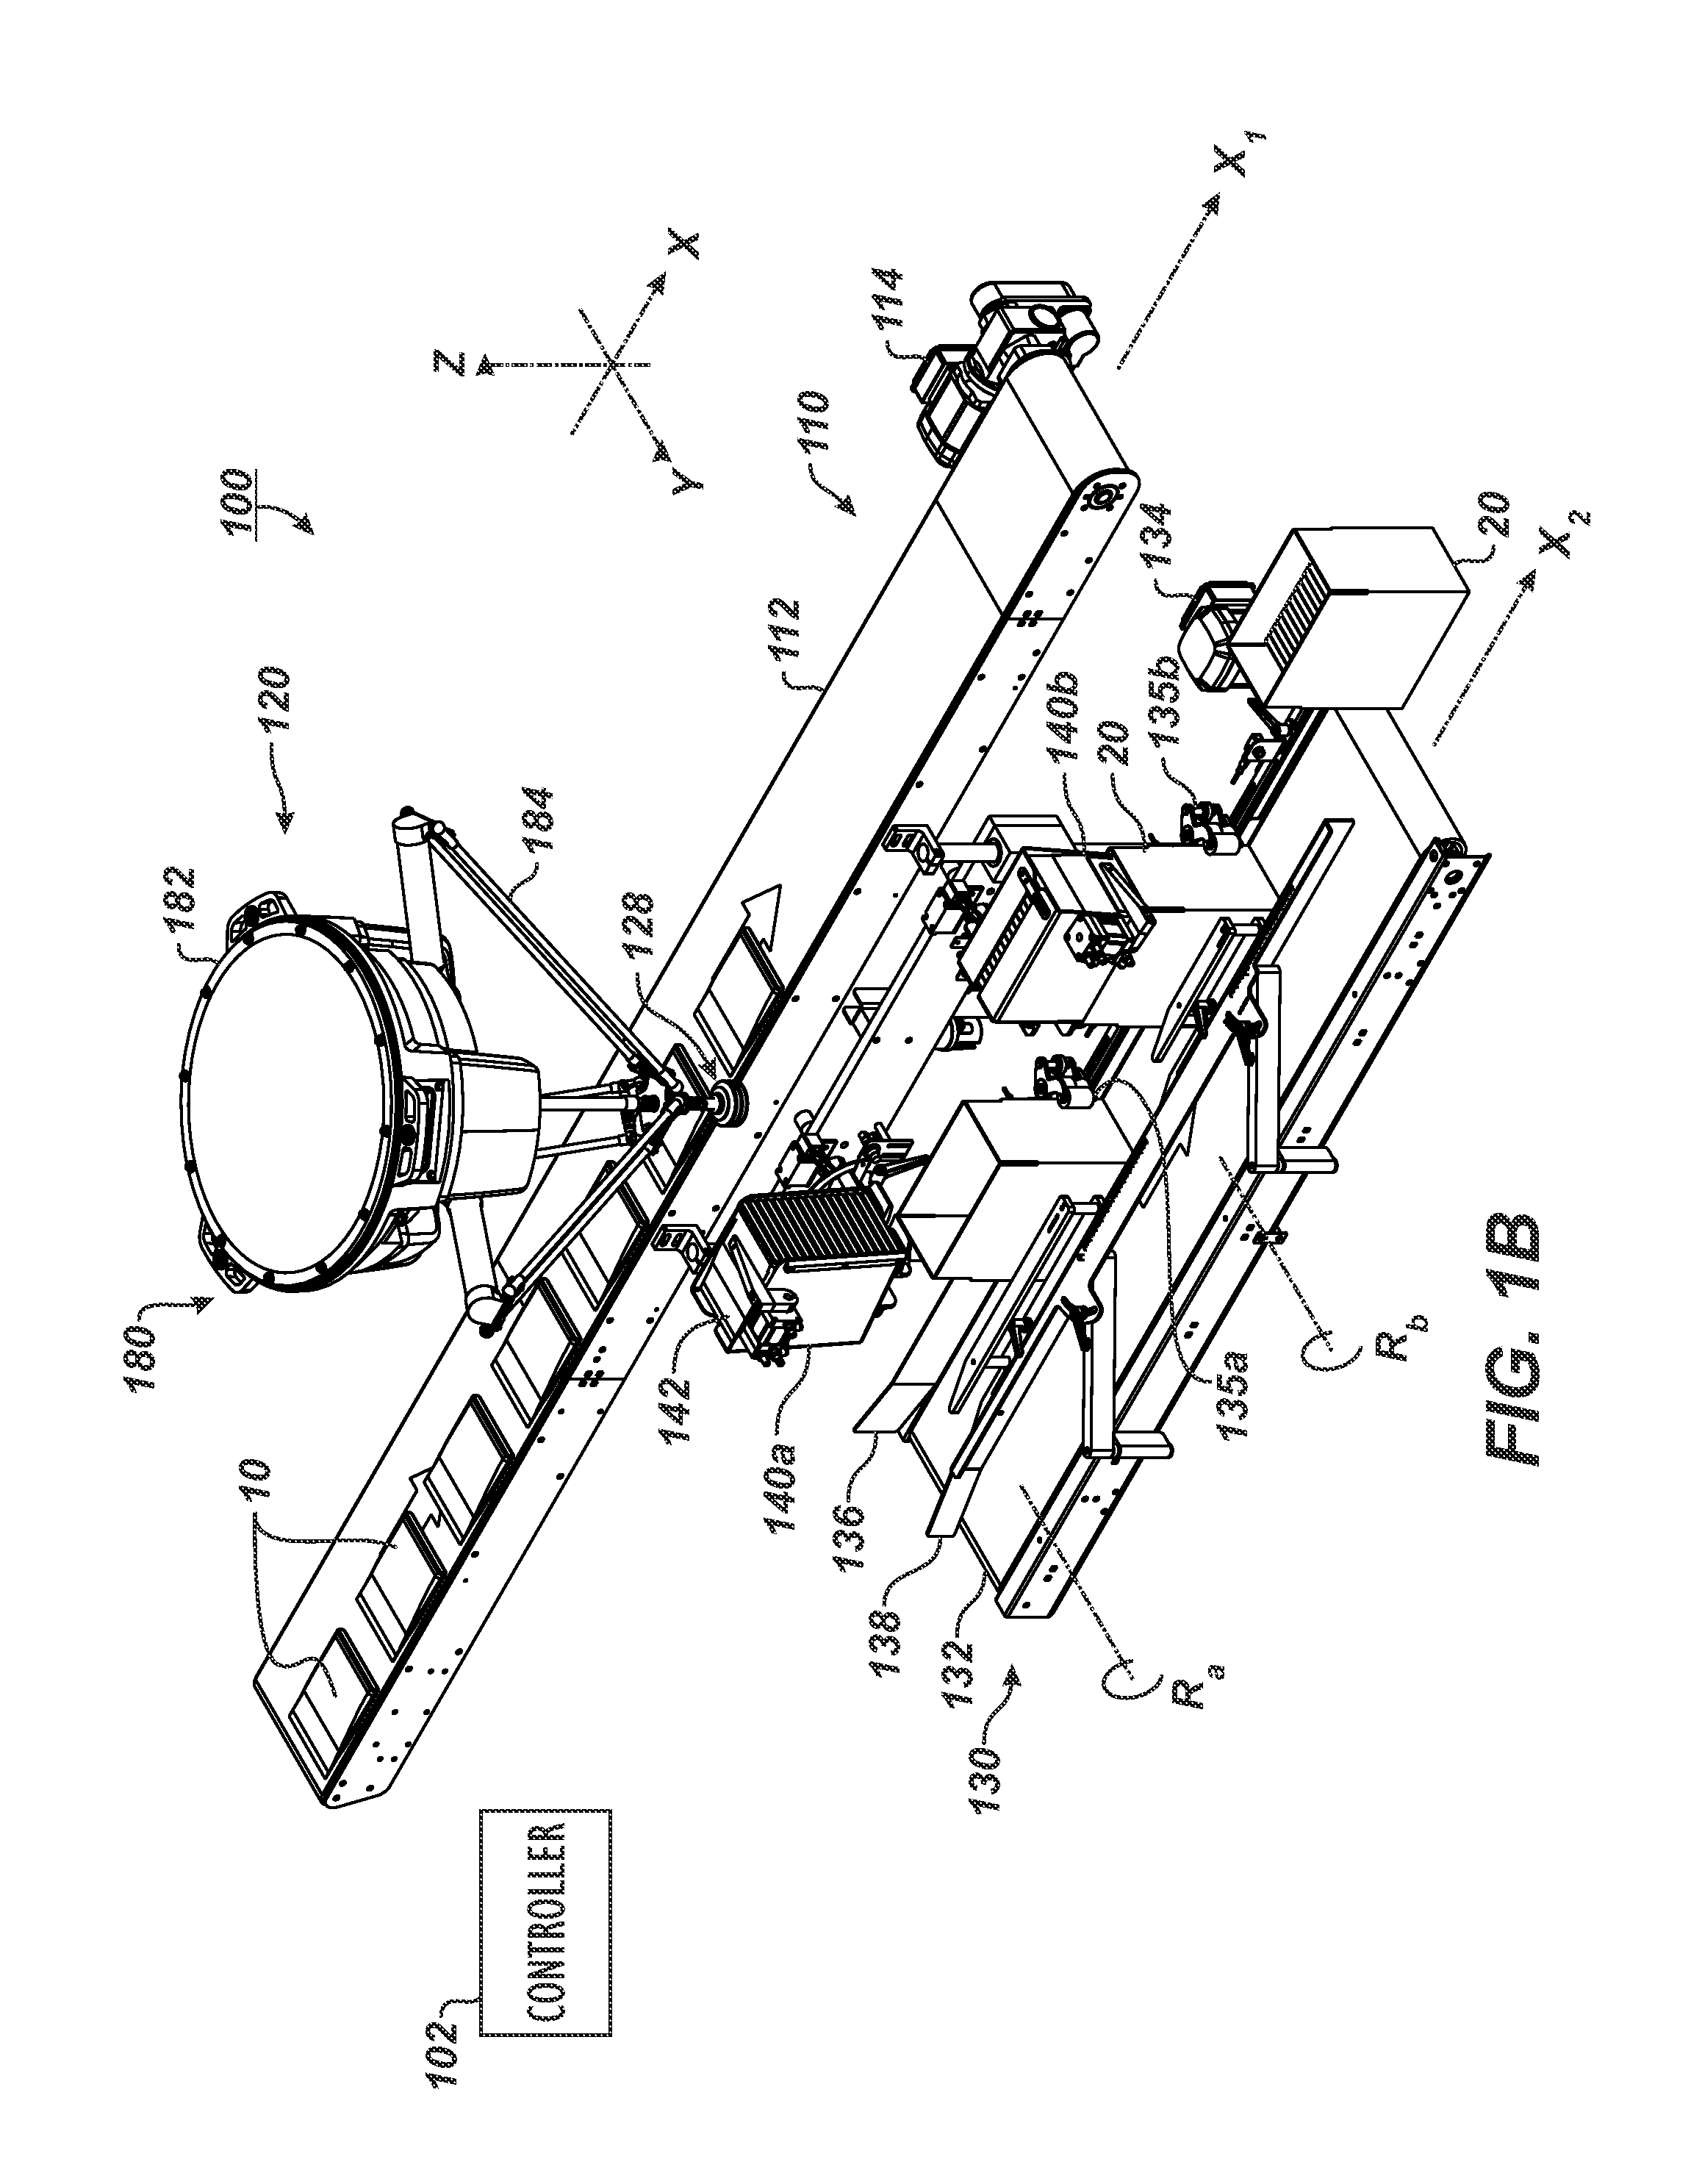 Case packing system having robotic pick and place mechanism and dual dump bins